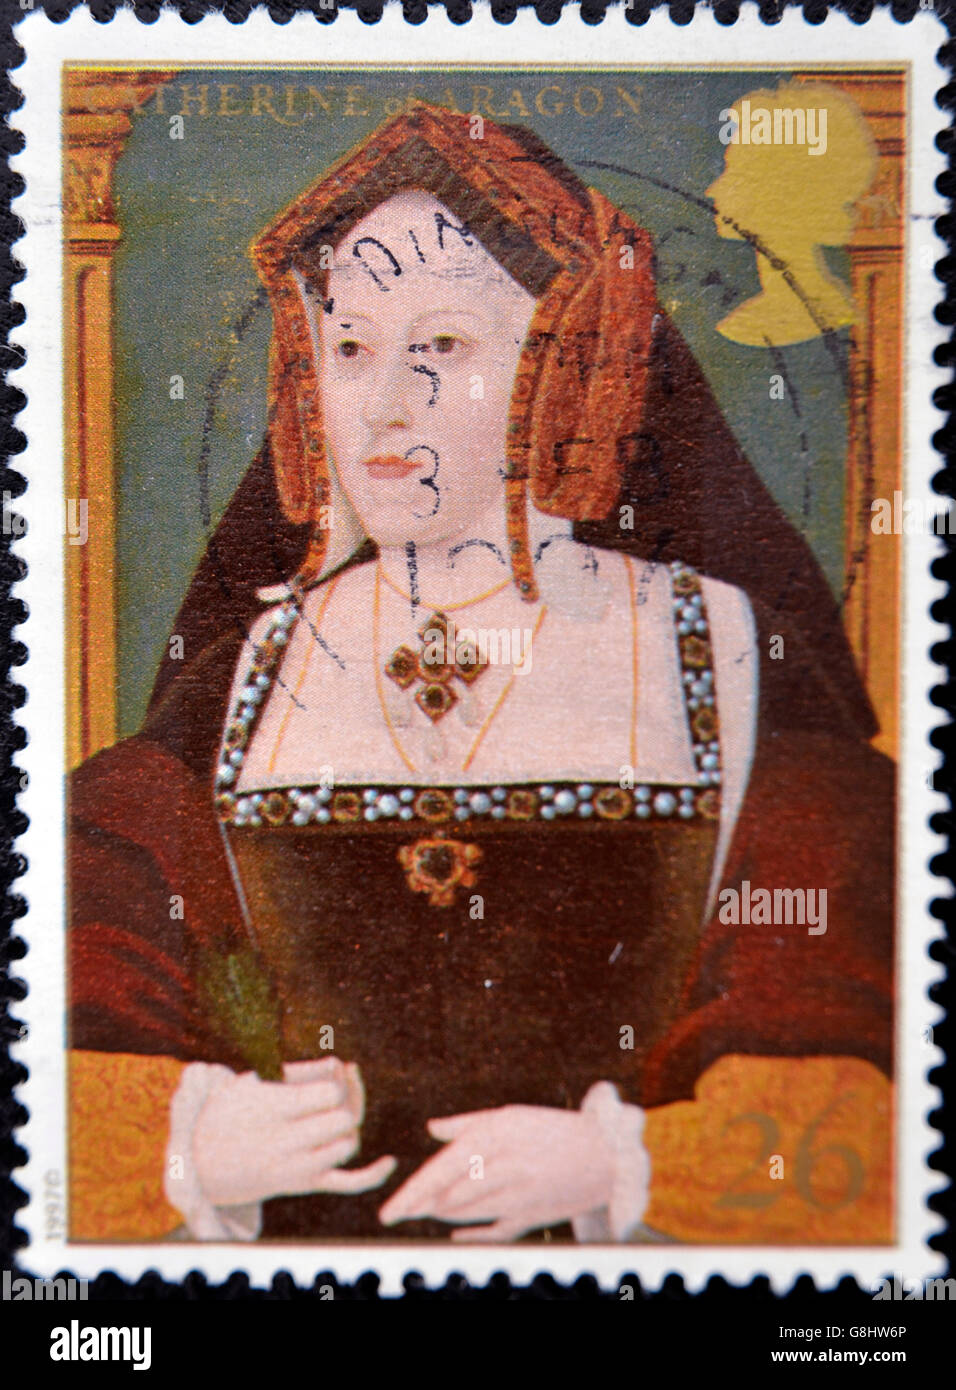 UNITED KINGDOM - CIRCA 1997: A stamp printed in Great Britain shows Catherine of Aragon, wife of king Henry VIII, circa 1997 Stock Photo